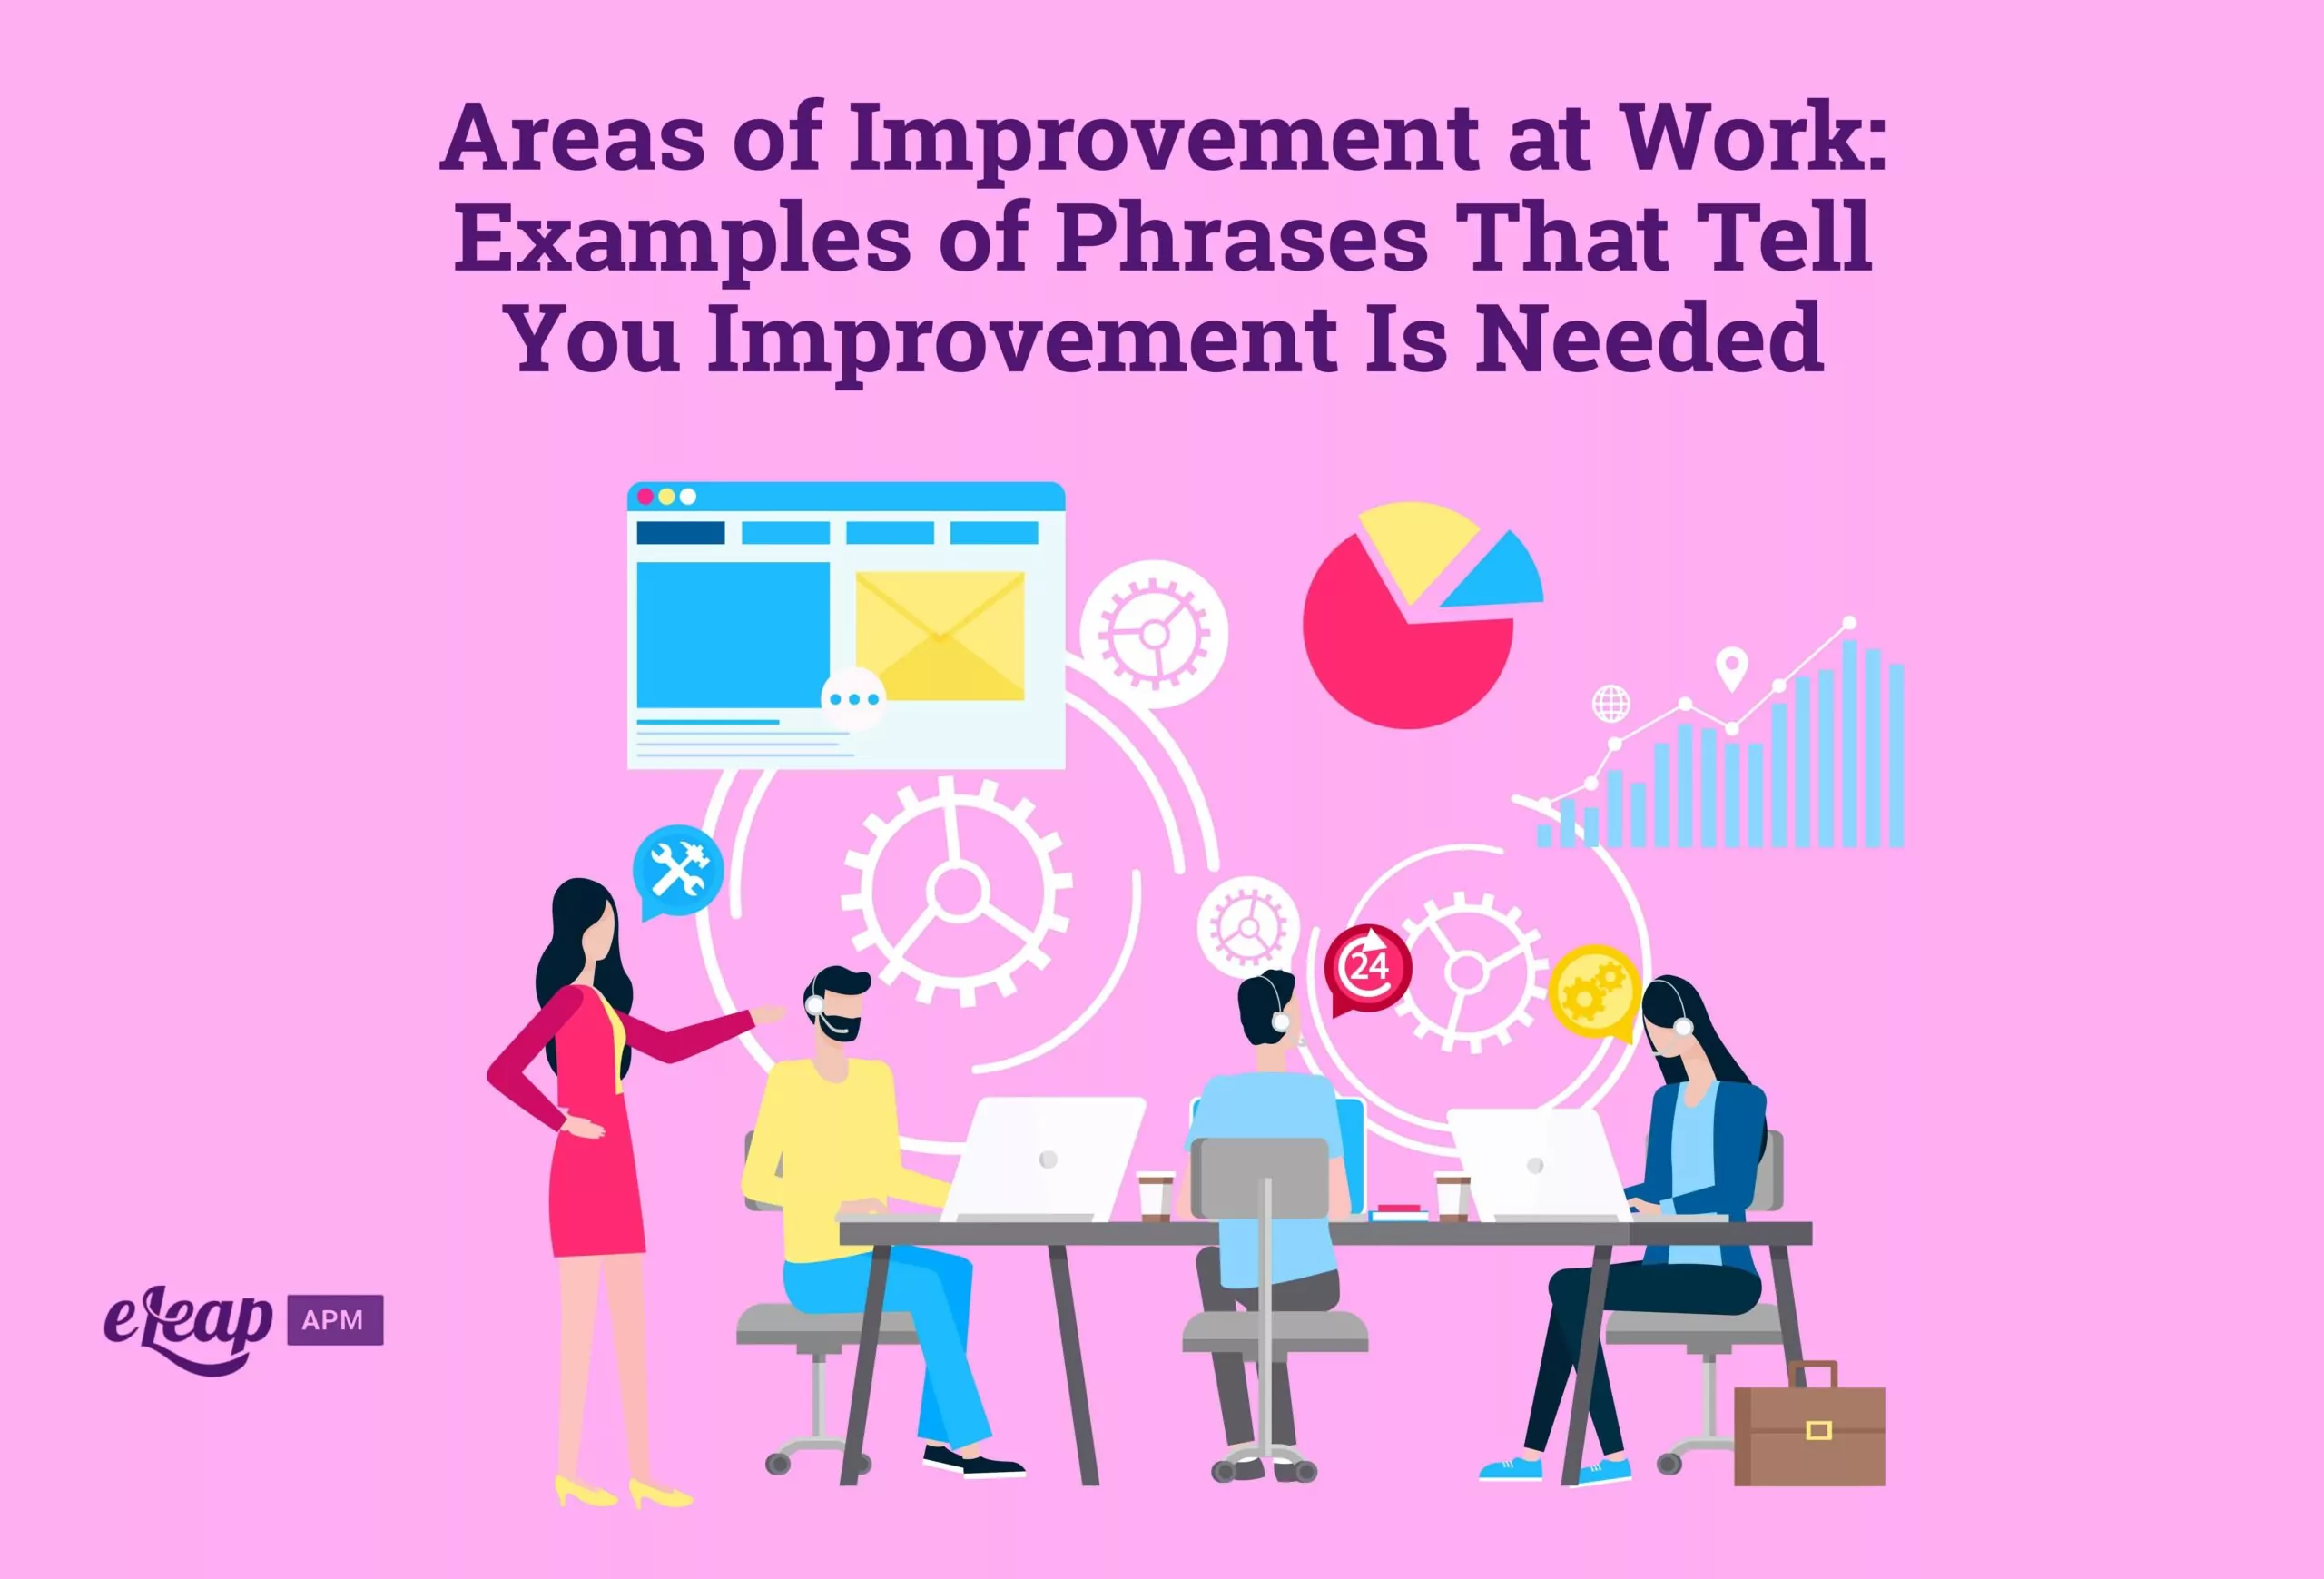 Areas of Improvement at Work: Examples of Phrases That Tell You Improvement Is Needed